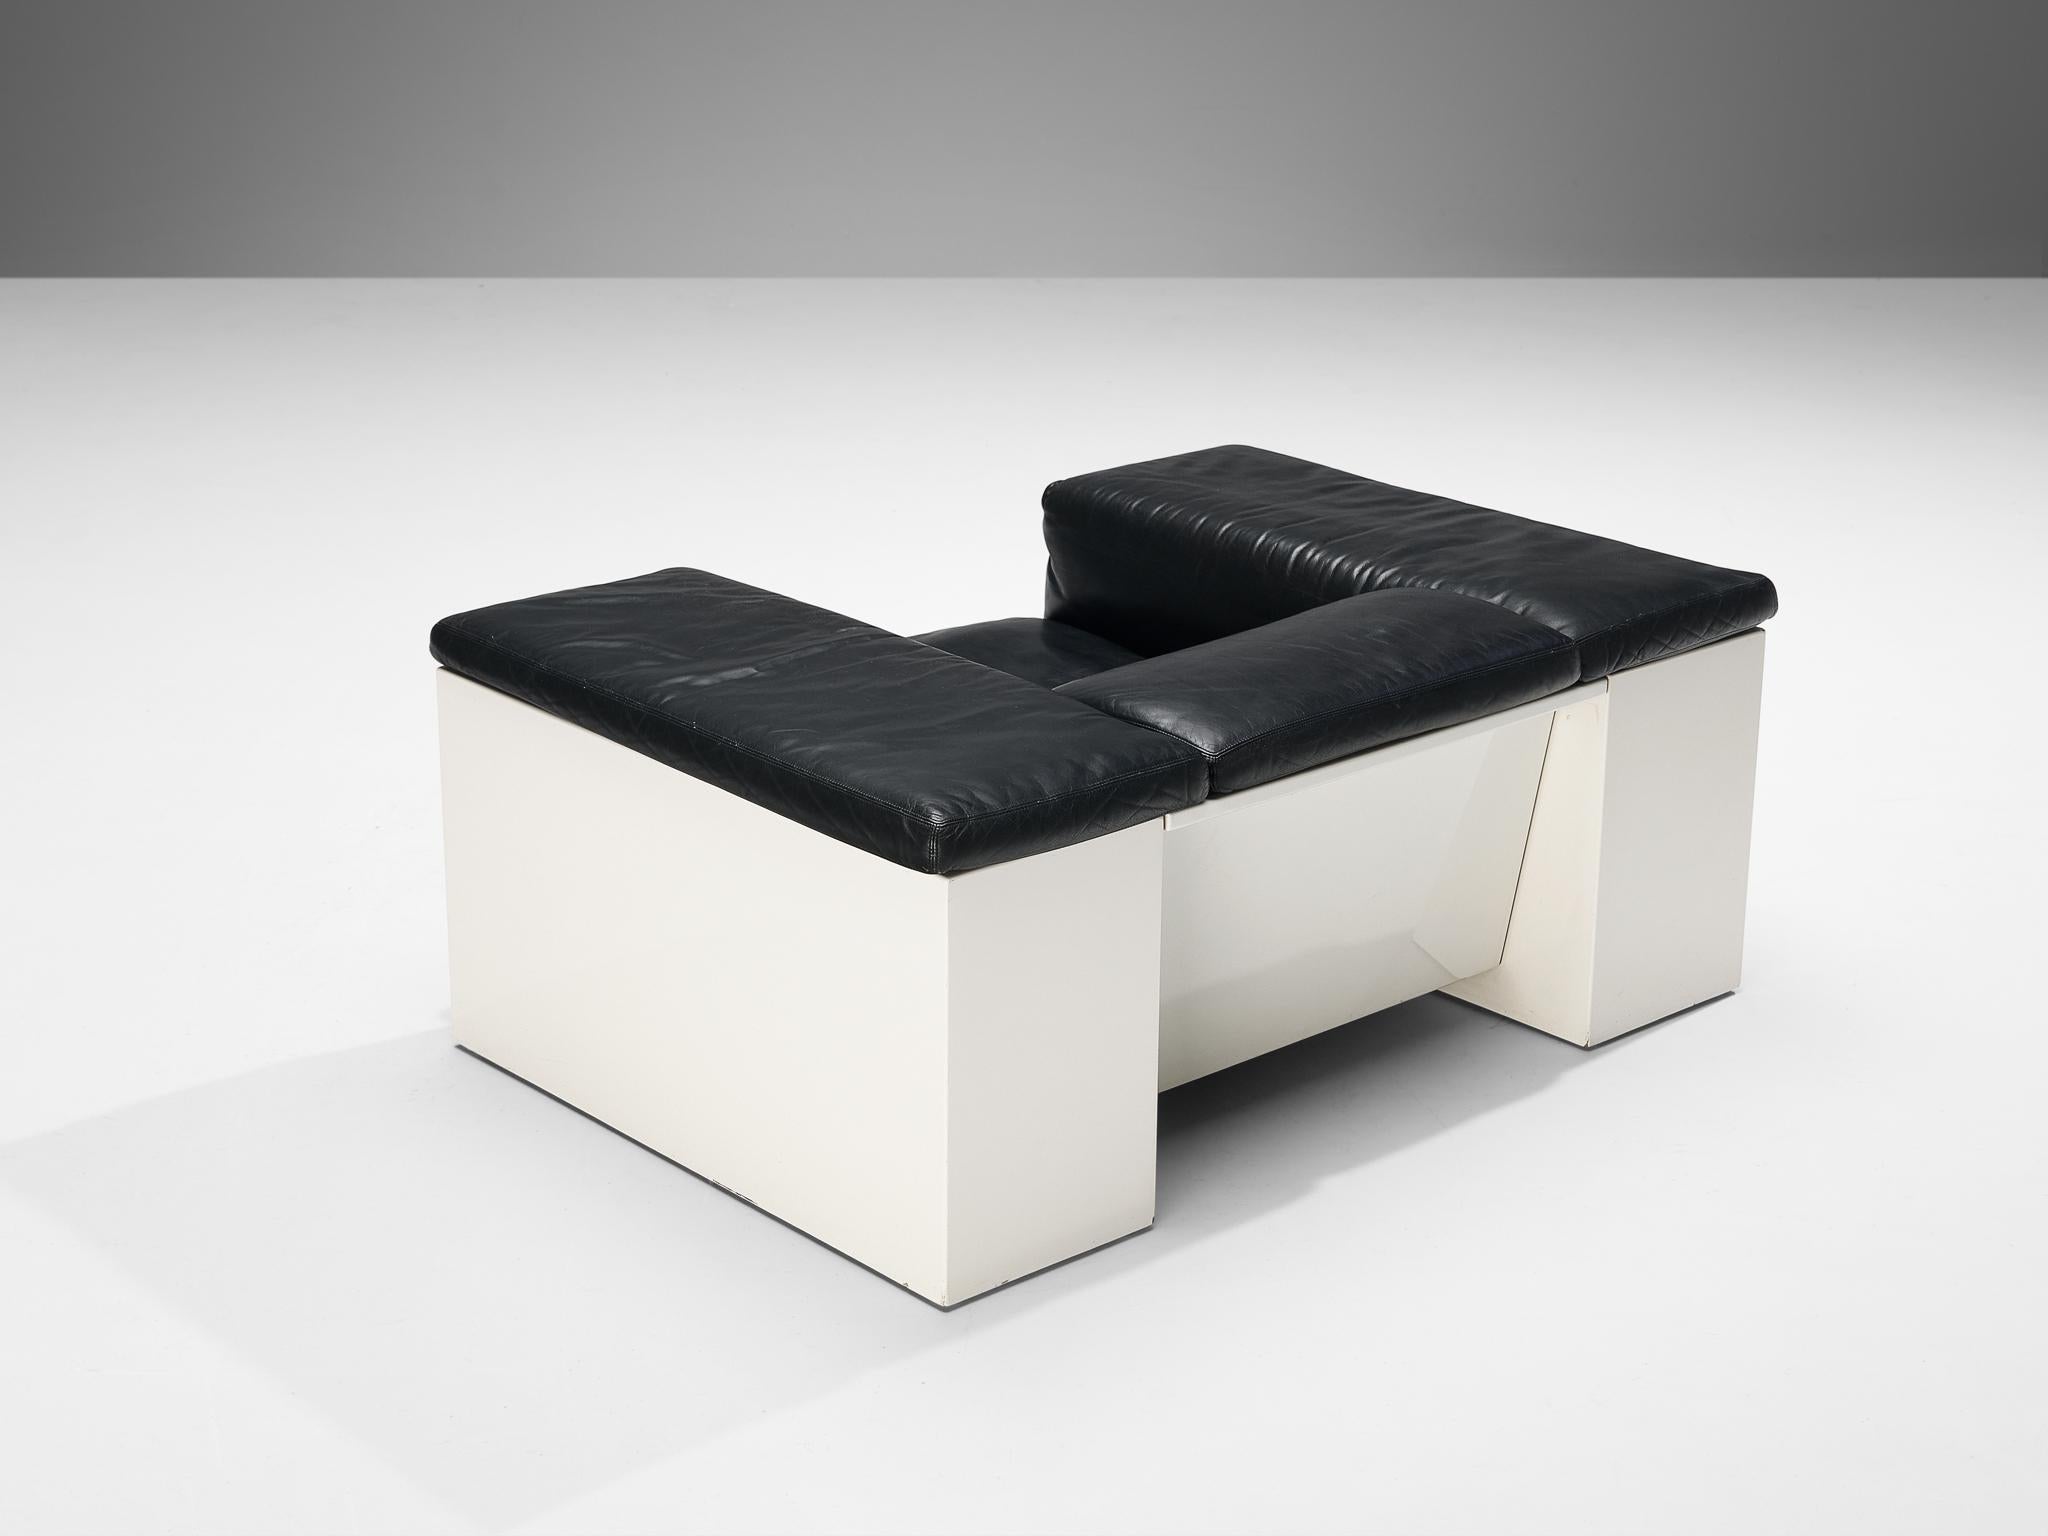 Cini Boeri for Knoll 'Brigadiere' Living Room Set in Black Leather 6